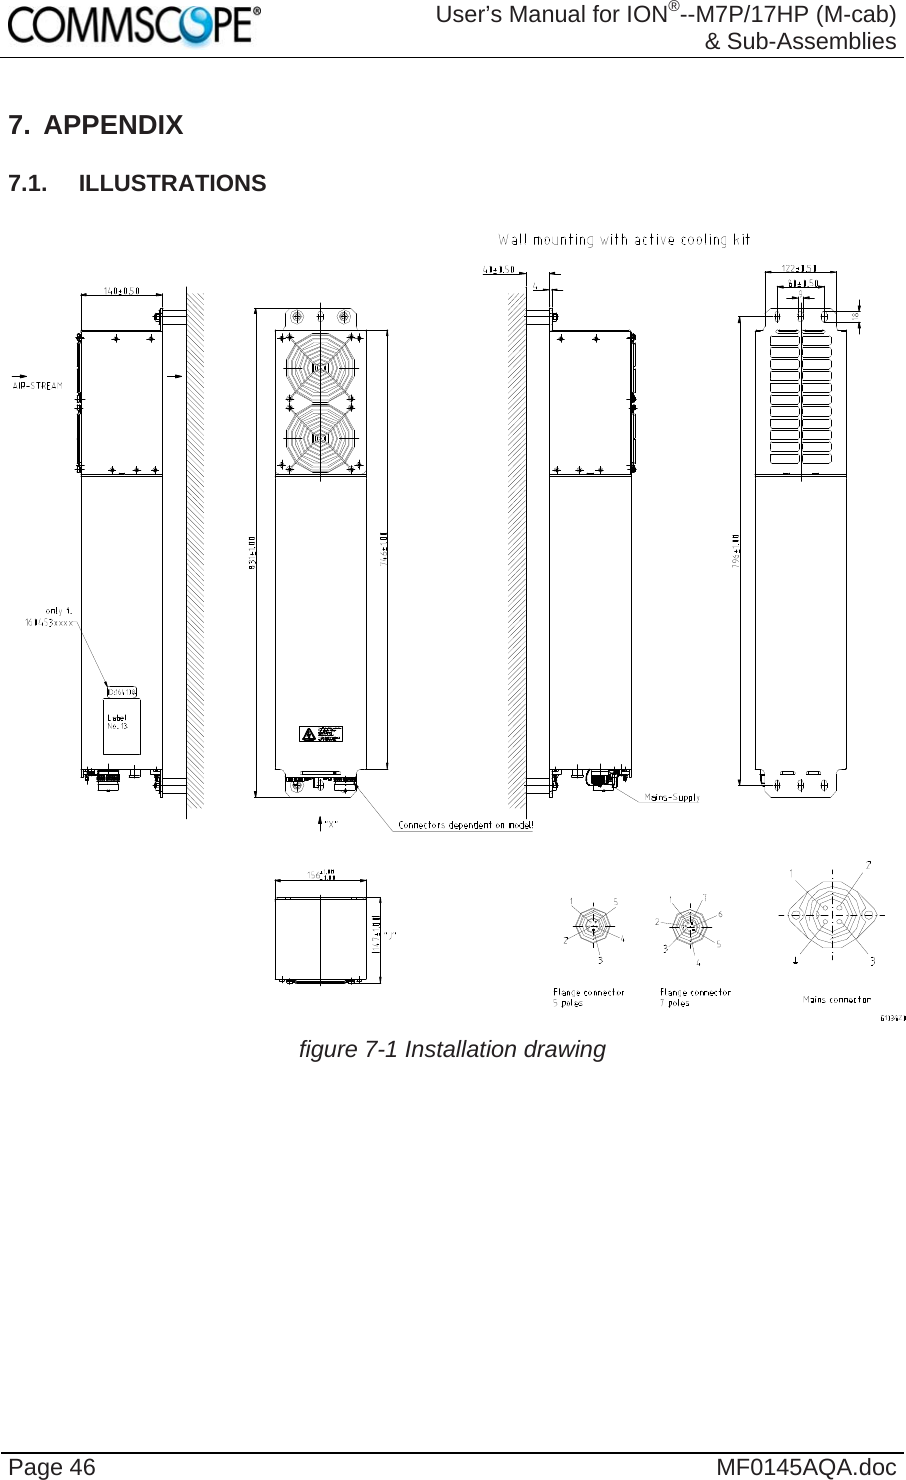  User’s Manual for ION®--M7P/17HP (M-cab) &amp; Sub-Assemblies Page 46  MF0145AQA.doc 7. APPENDIX 7.1. ILLUSTRATIONS   figure 7-1 Installation drawing  